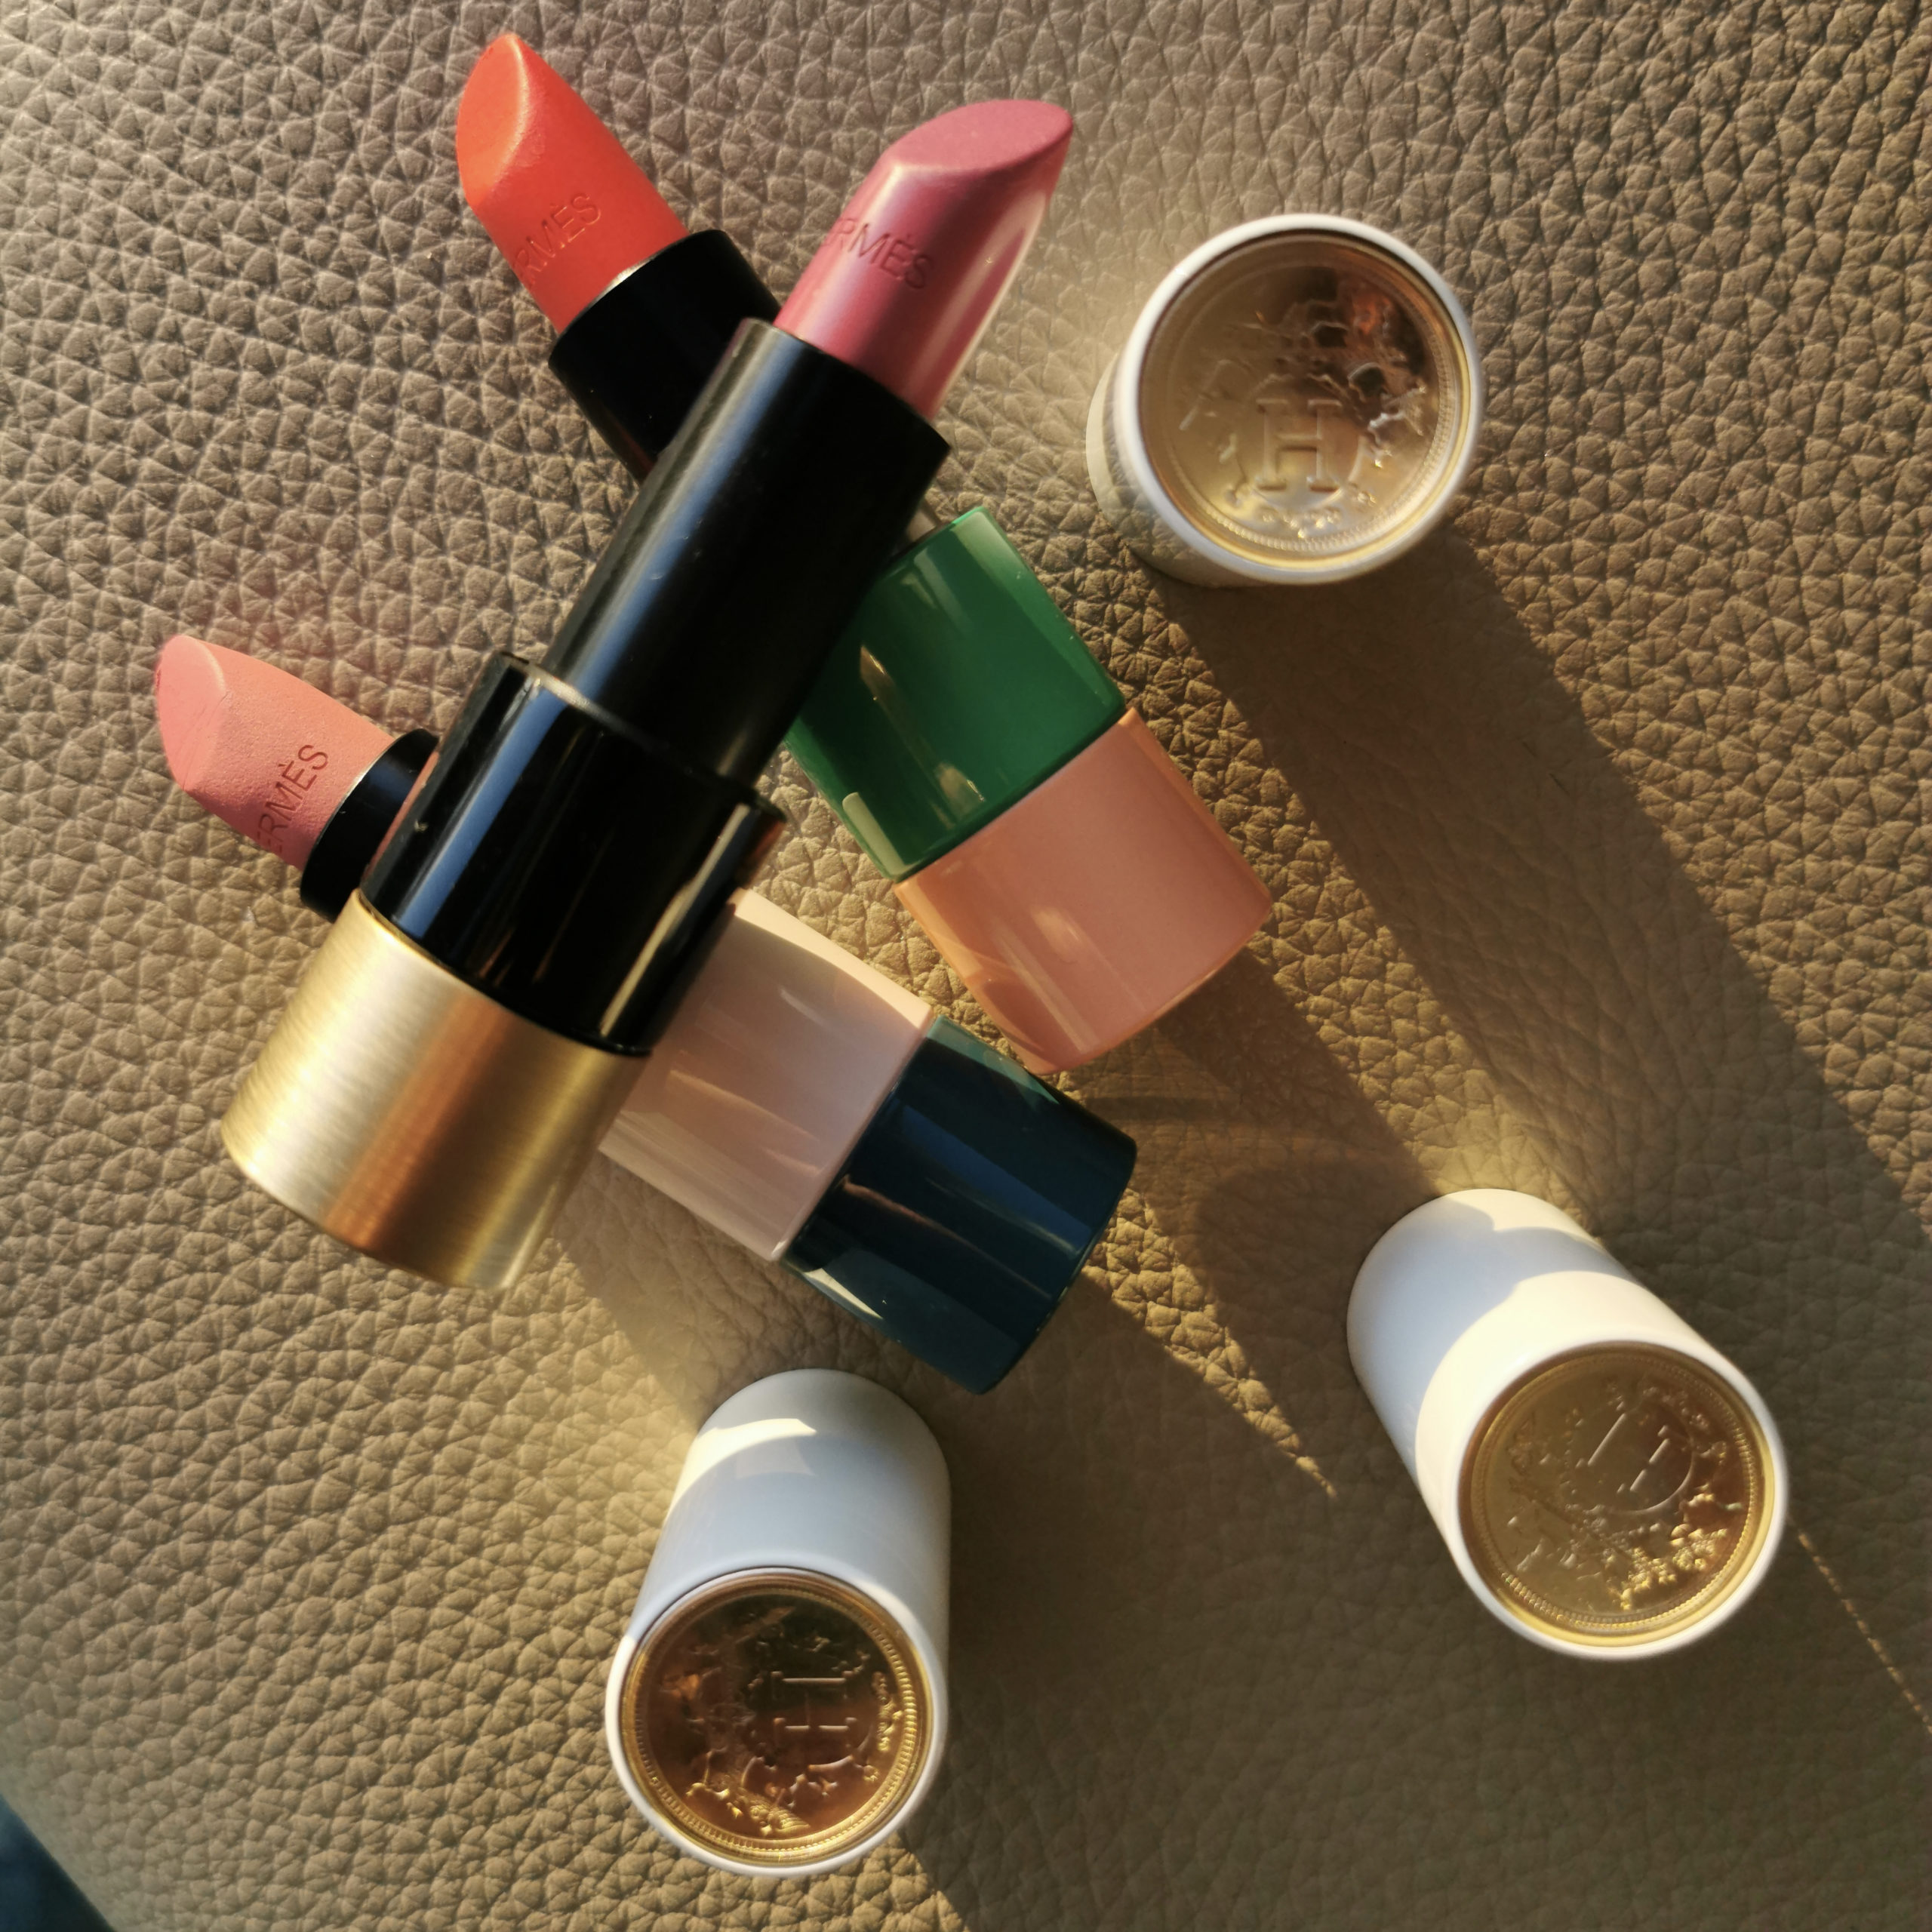 Hermès lipstick Satin and Matte formula review and swatches